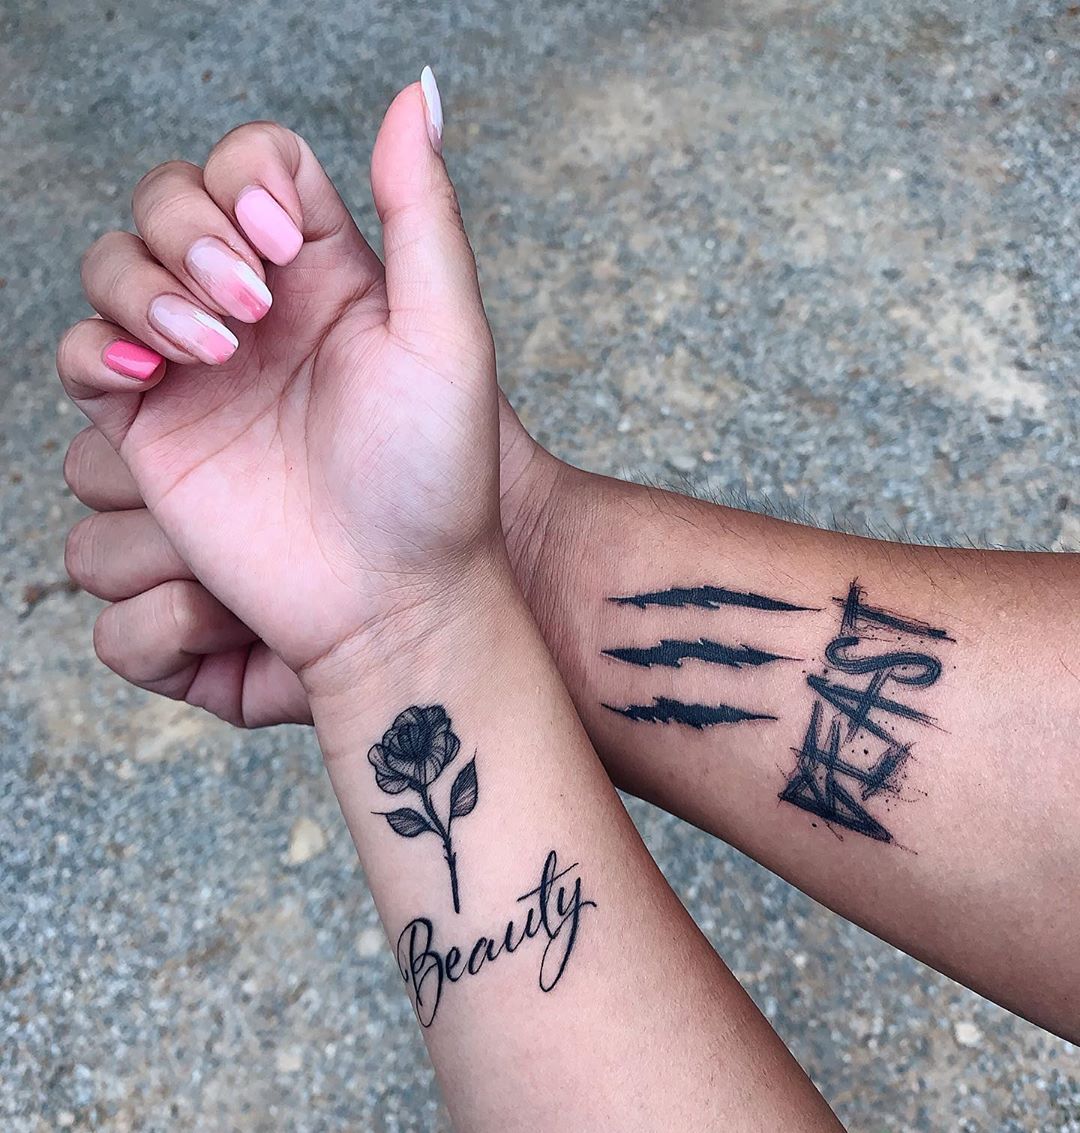 UPDATED: 44 Beauty and the Beast Tattoos (Updated Feb 2020)